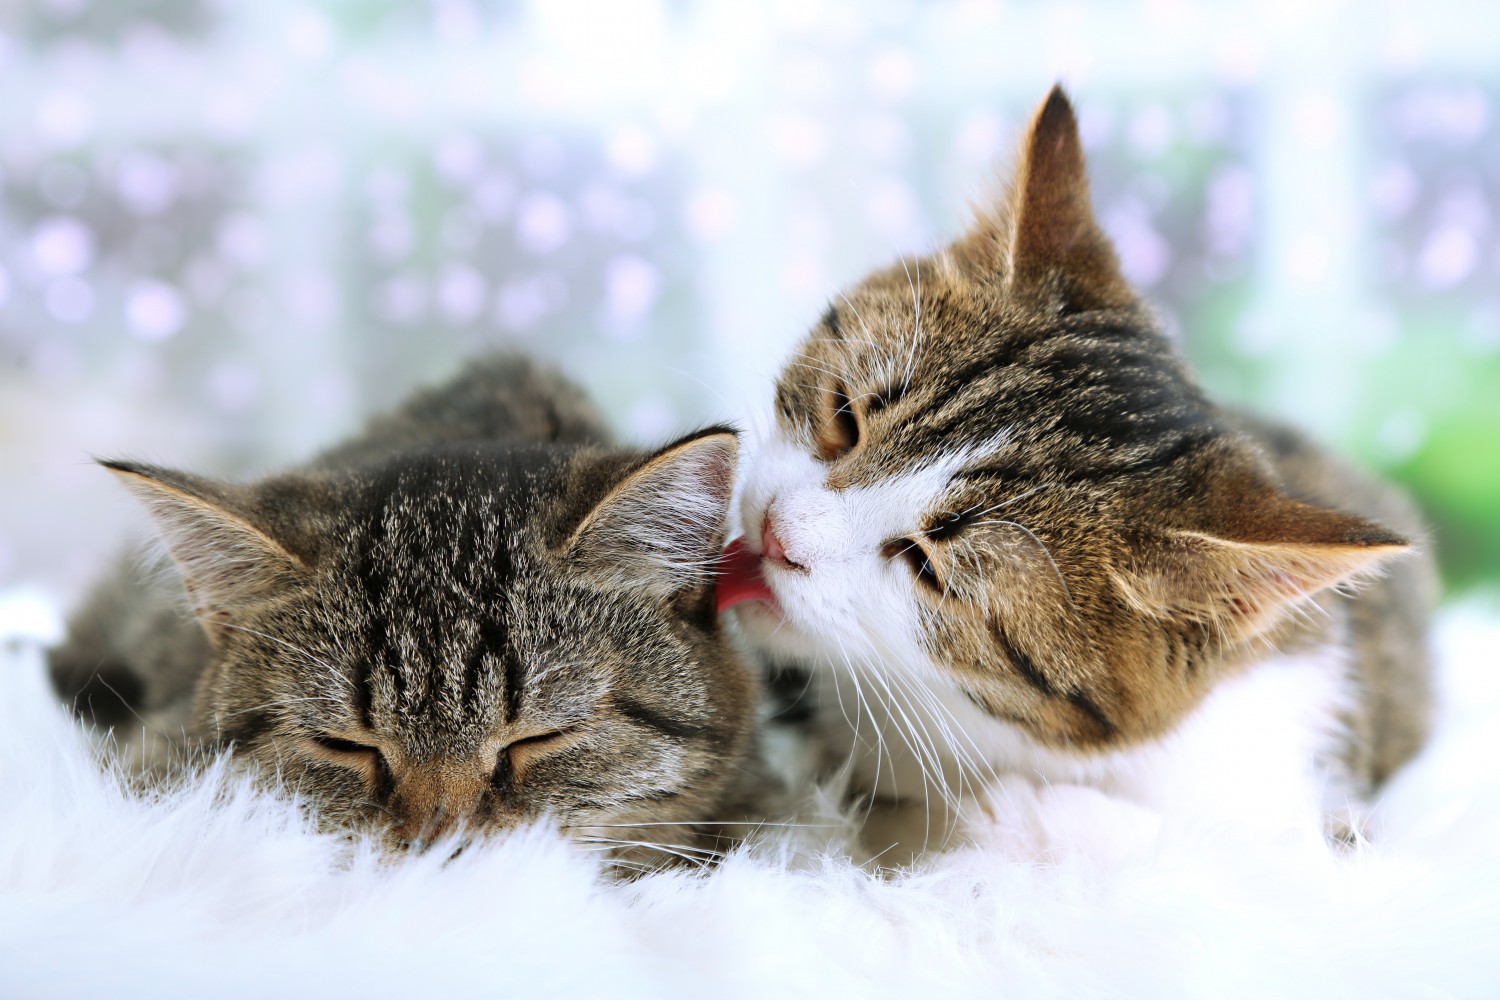 Kittens licking each other